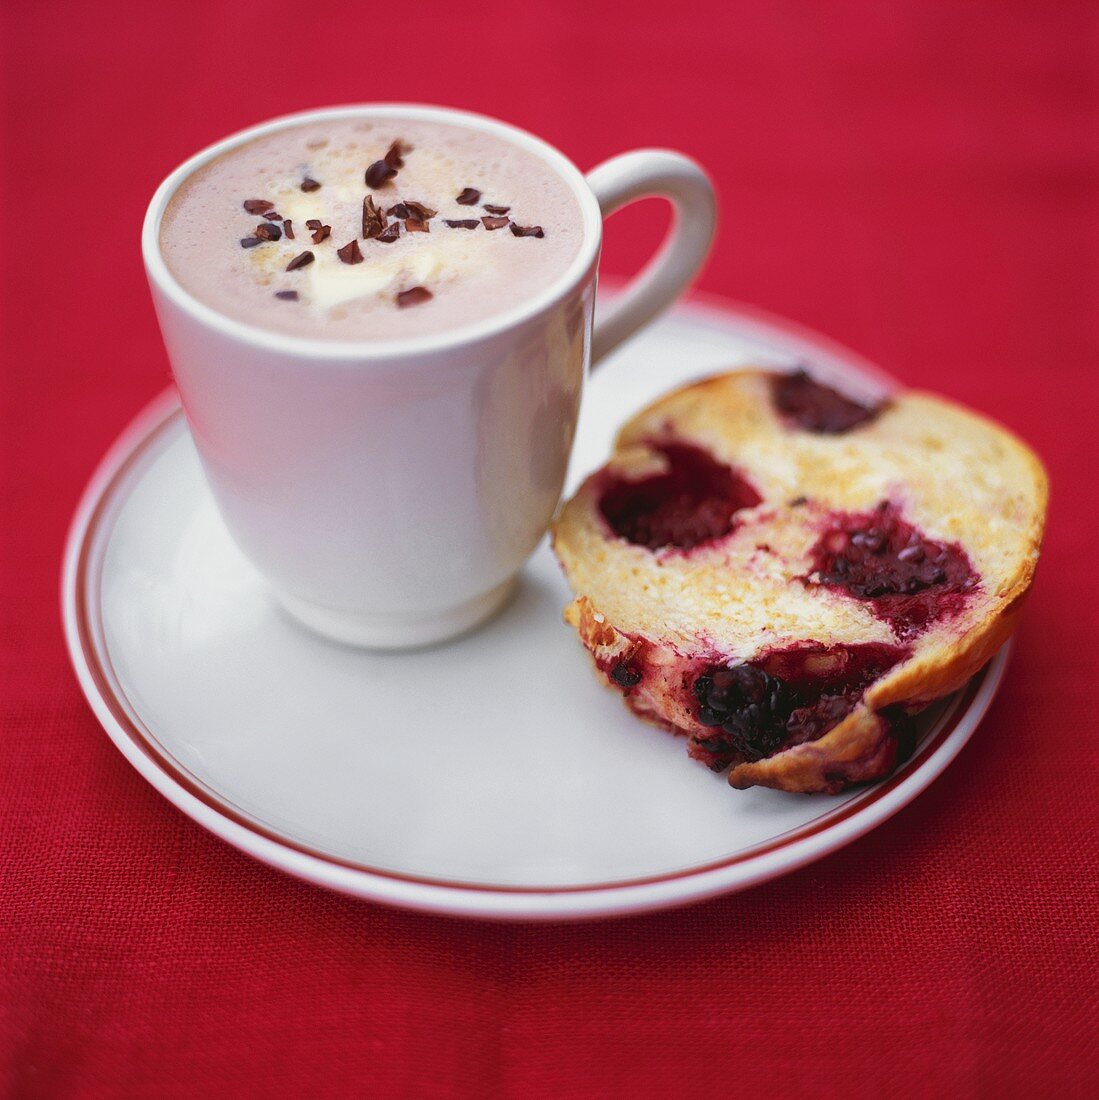 A cup of chocolate and a piece of blackberry muffin